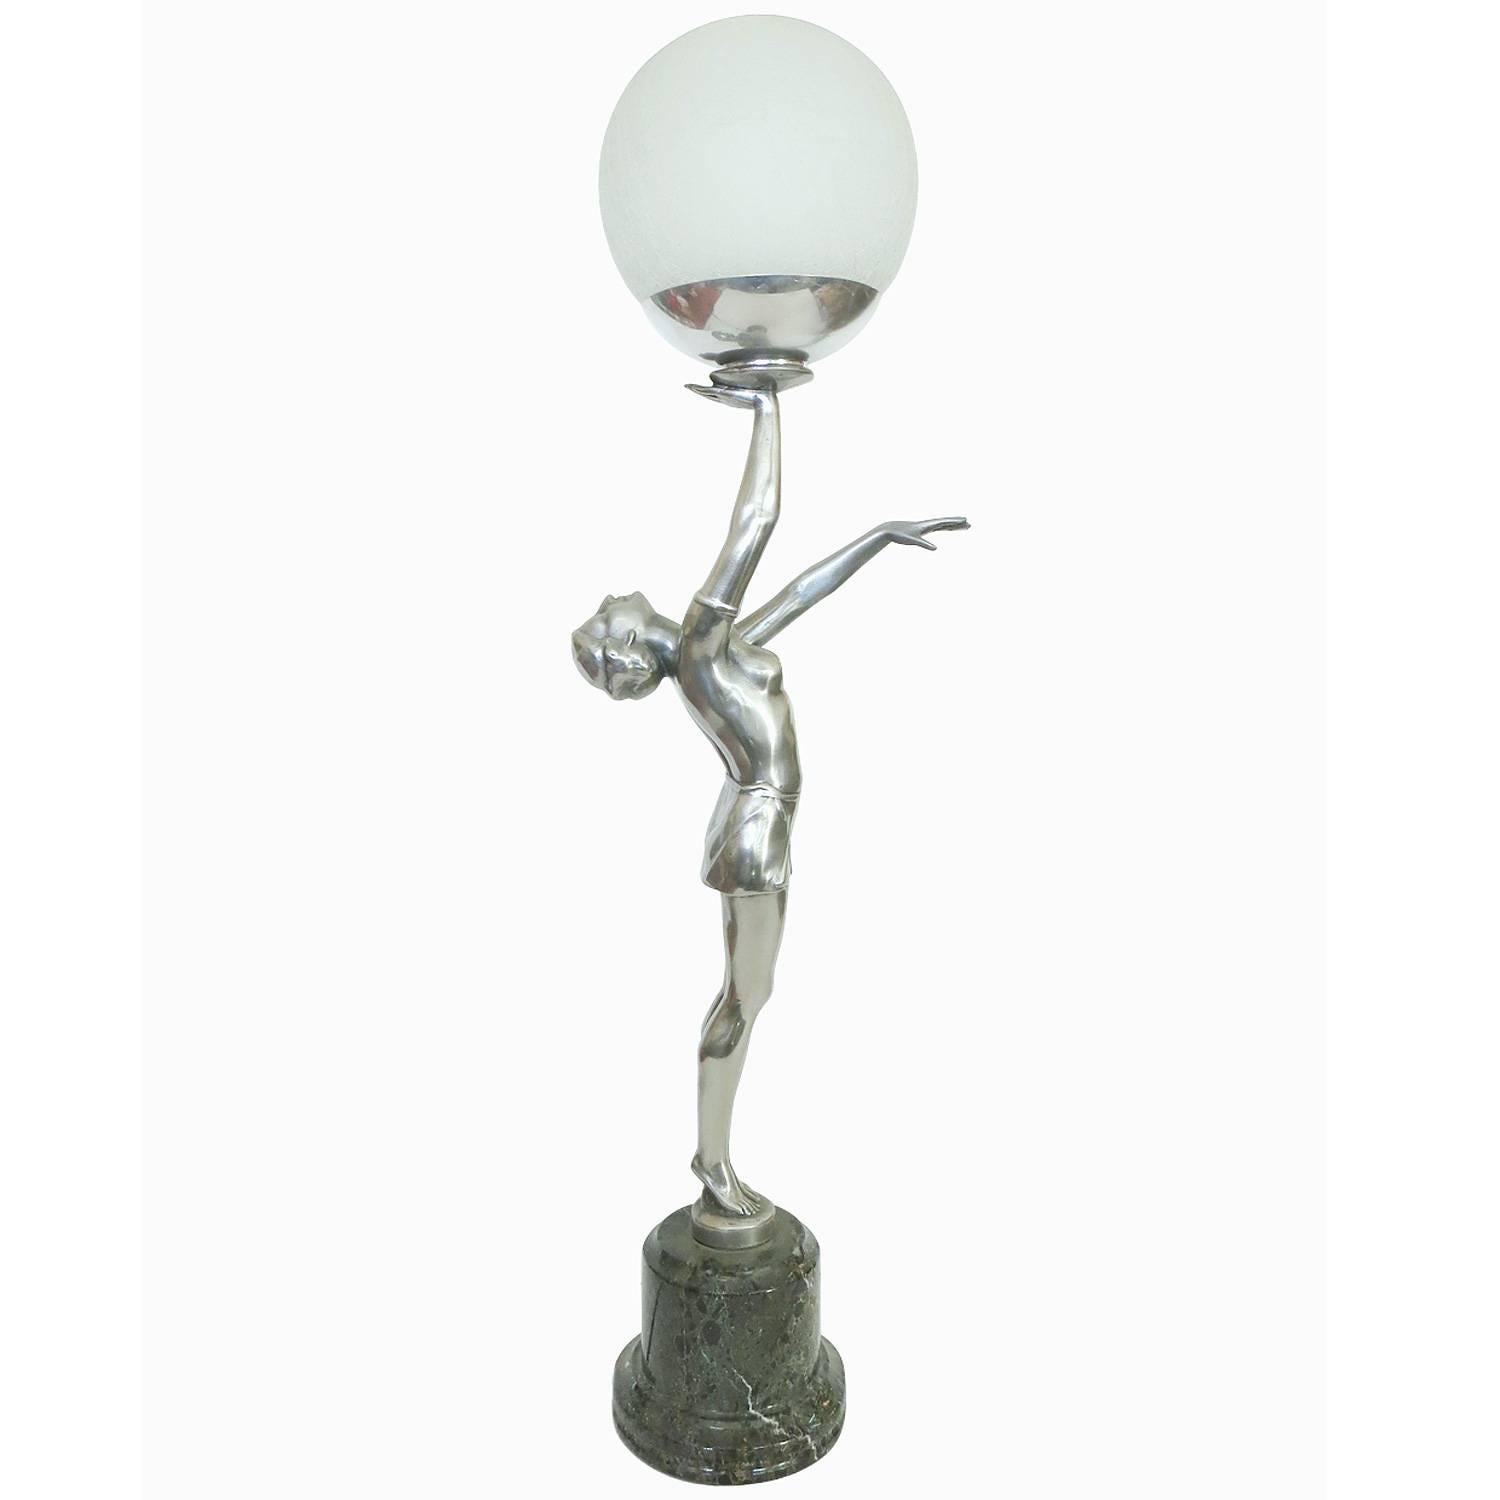 French Art Deco style nude danseuse lamp on a stepped marble base fashioned much after the French bronze sculpture Max Le Verrier. 

This gorgeous looking lamp features a casted bronze nude ballet dancer statue with an antique silver finish. This